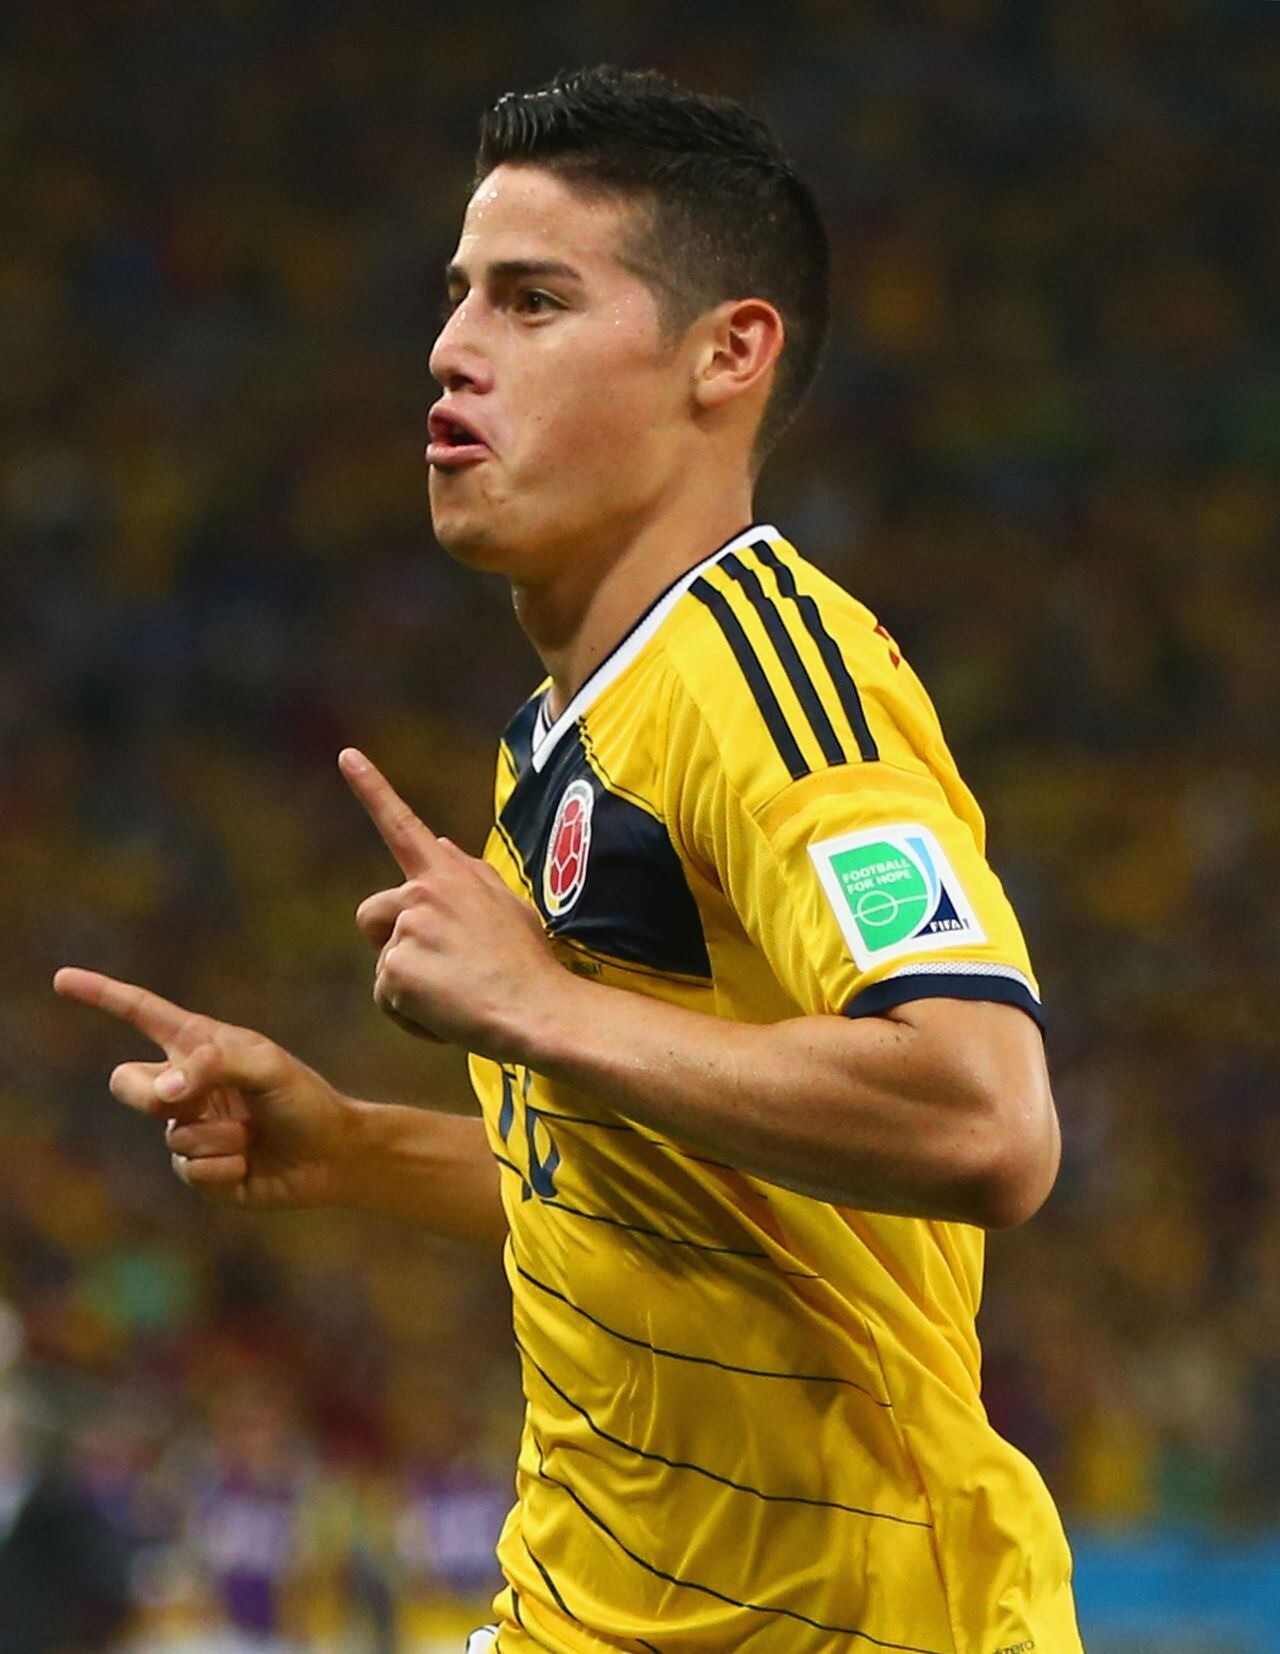 RIO DE JANEIRO, BRAZIL - JUNE 28:  James Rodriguez of Colombia celebrates scoring his team's first goal during the 2014 FIFA World Cup Brazil round of 16 match between Colombia and Uruguay at Maracana on June 28, 2014 in Rio de Janeiro, Brazil.  (Photo by Jamie Squire/Getty Images)